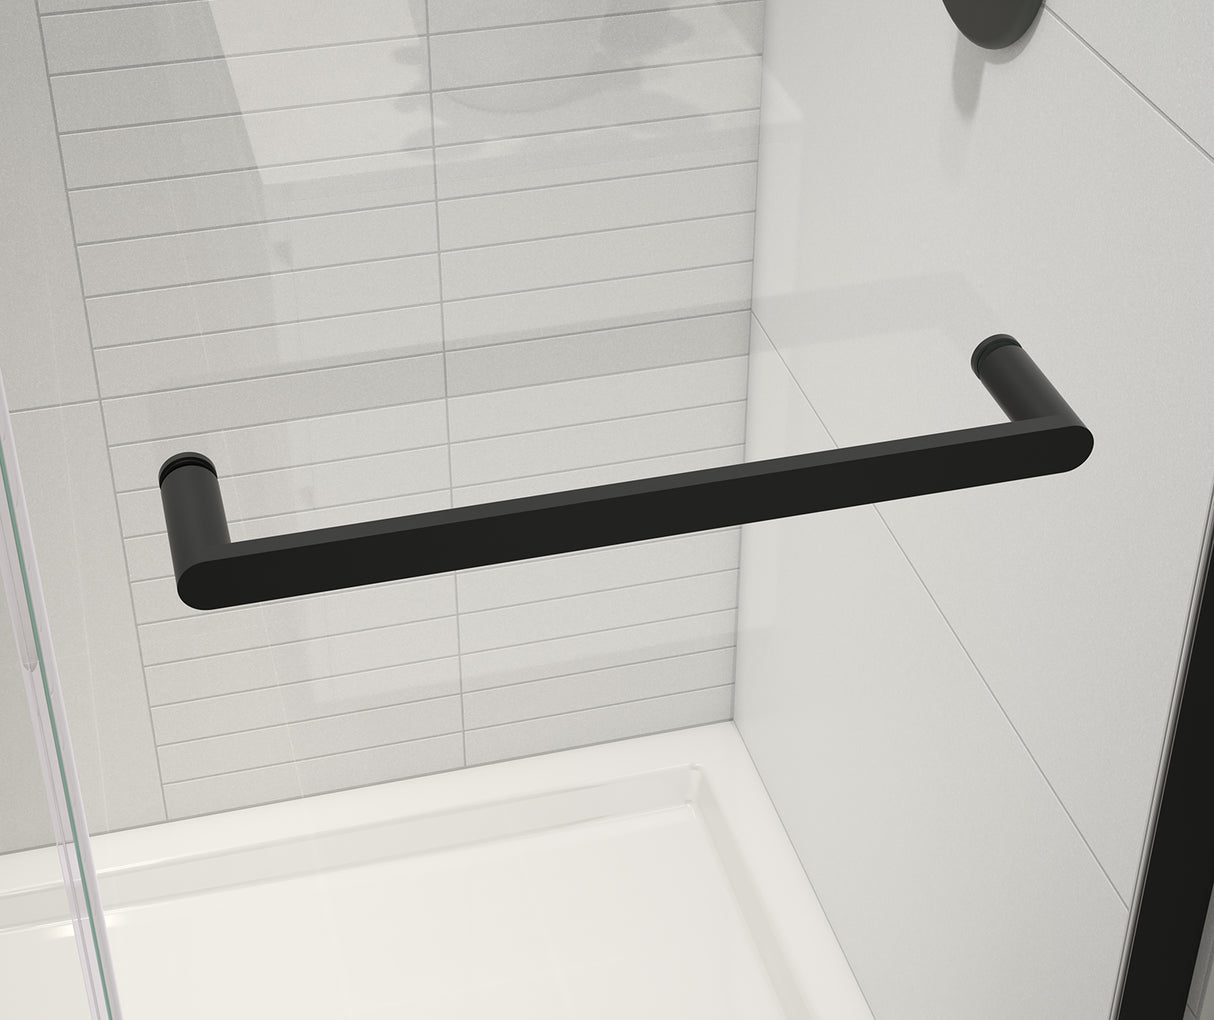 MAAX 138954-900-340-000 Halo Pro 44 ½-47 x 78 ¾ in. 8 mm Sliding Shower Door with Towel Bar for Alcove Installation with Clear glass in Matte Black